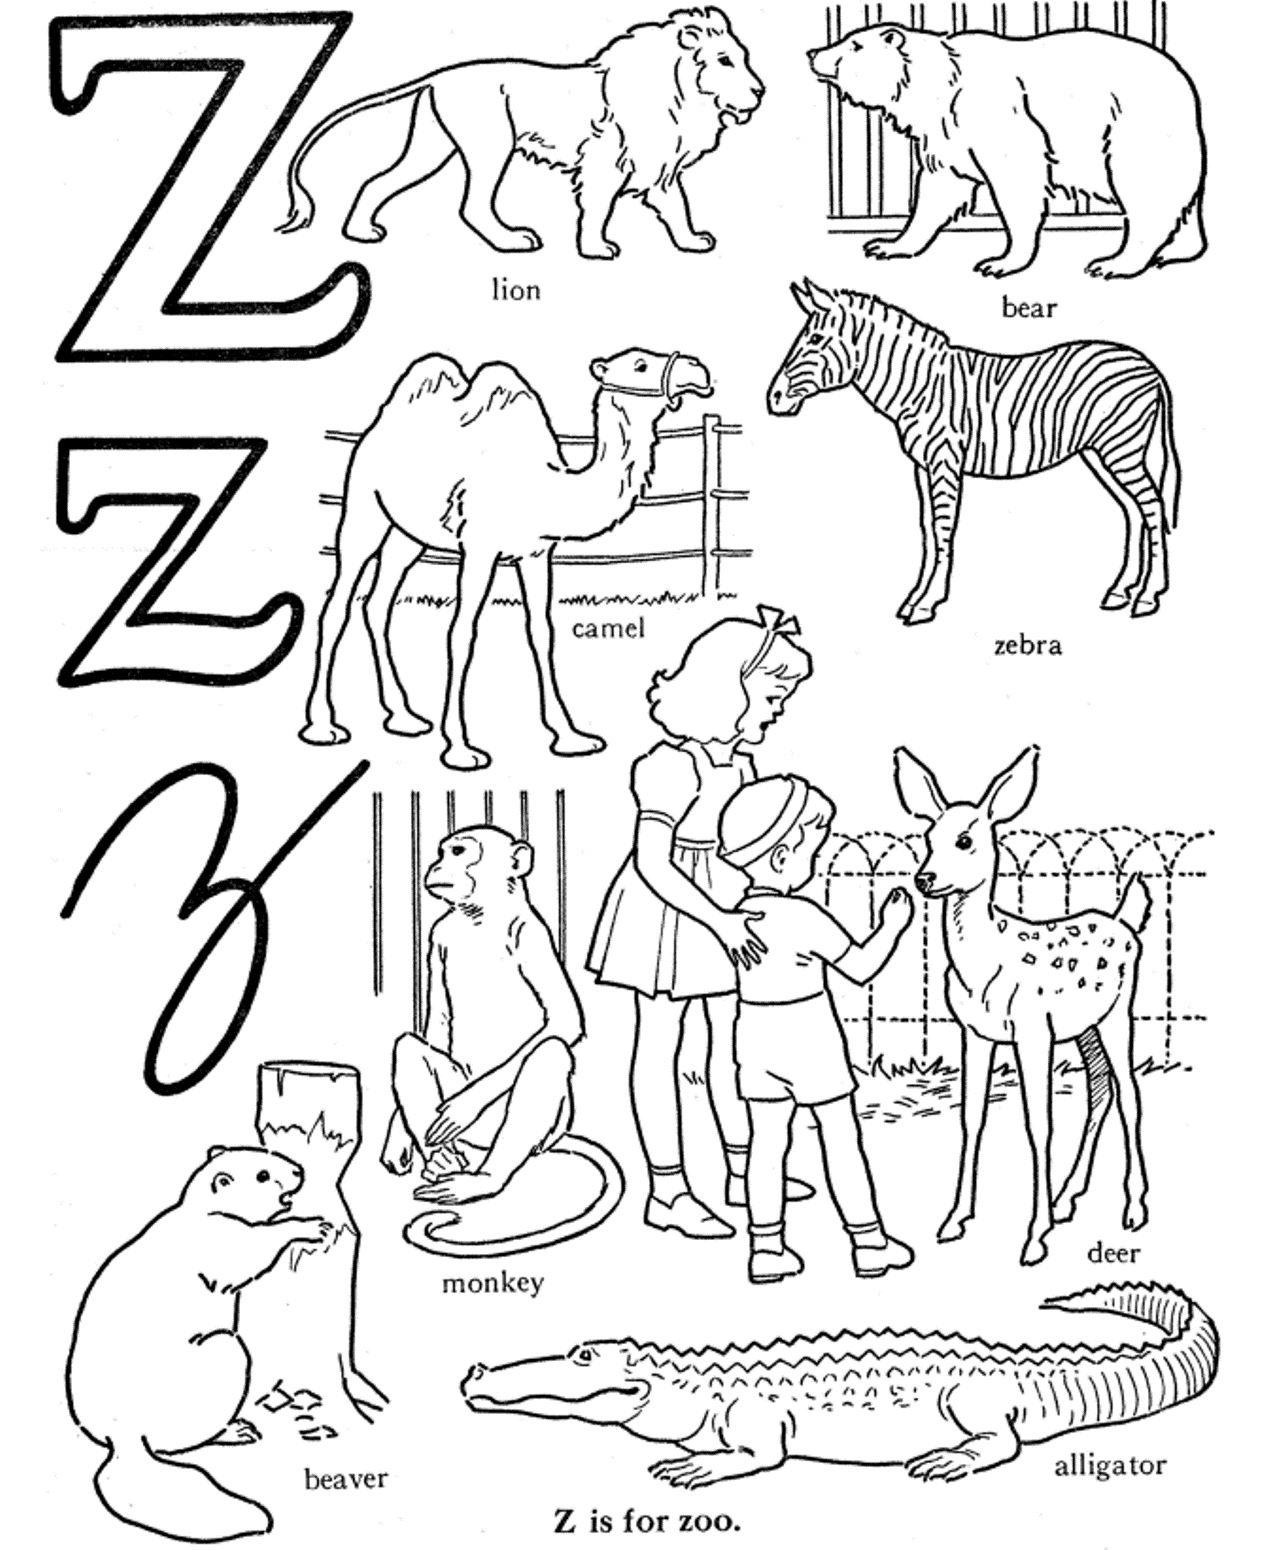 Z is for Zoo Coloring Page